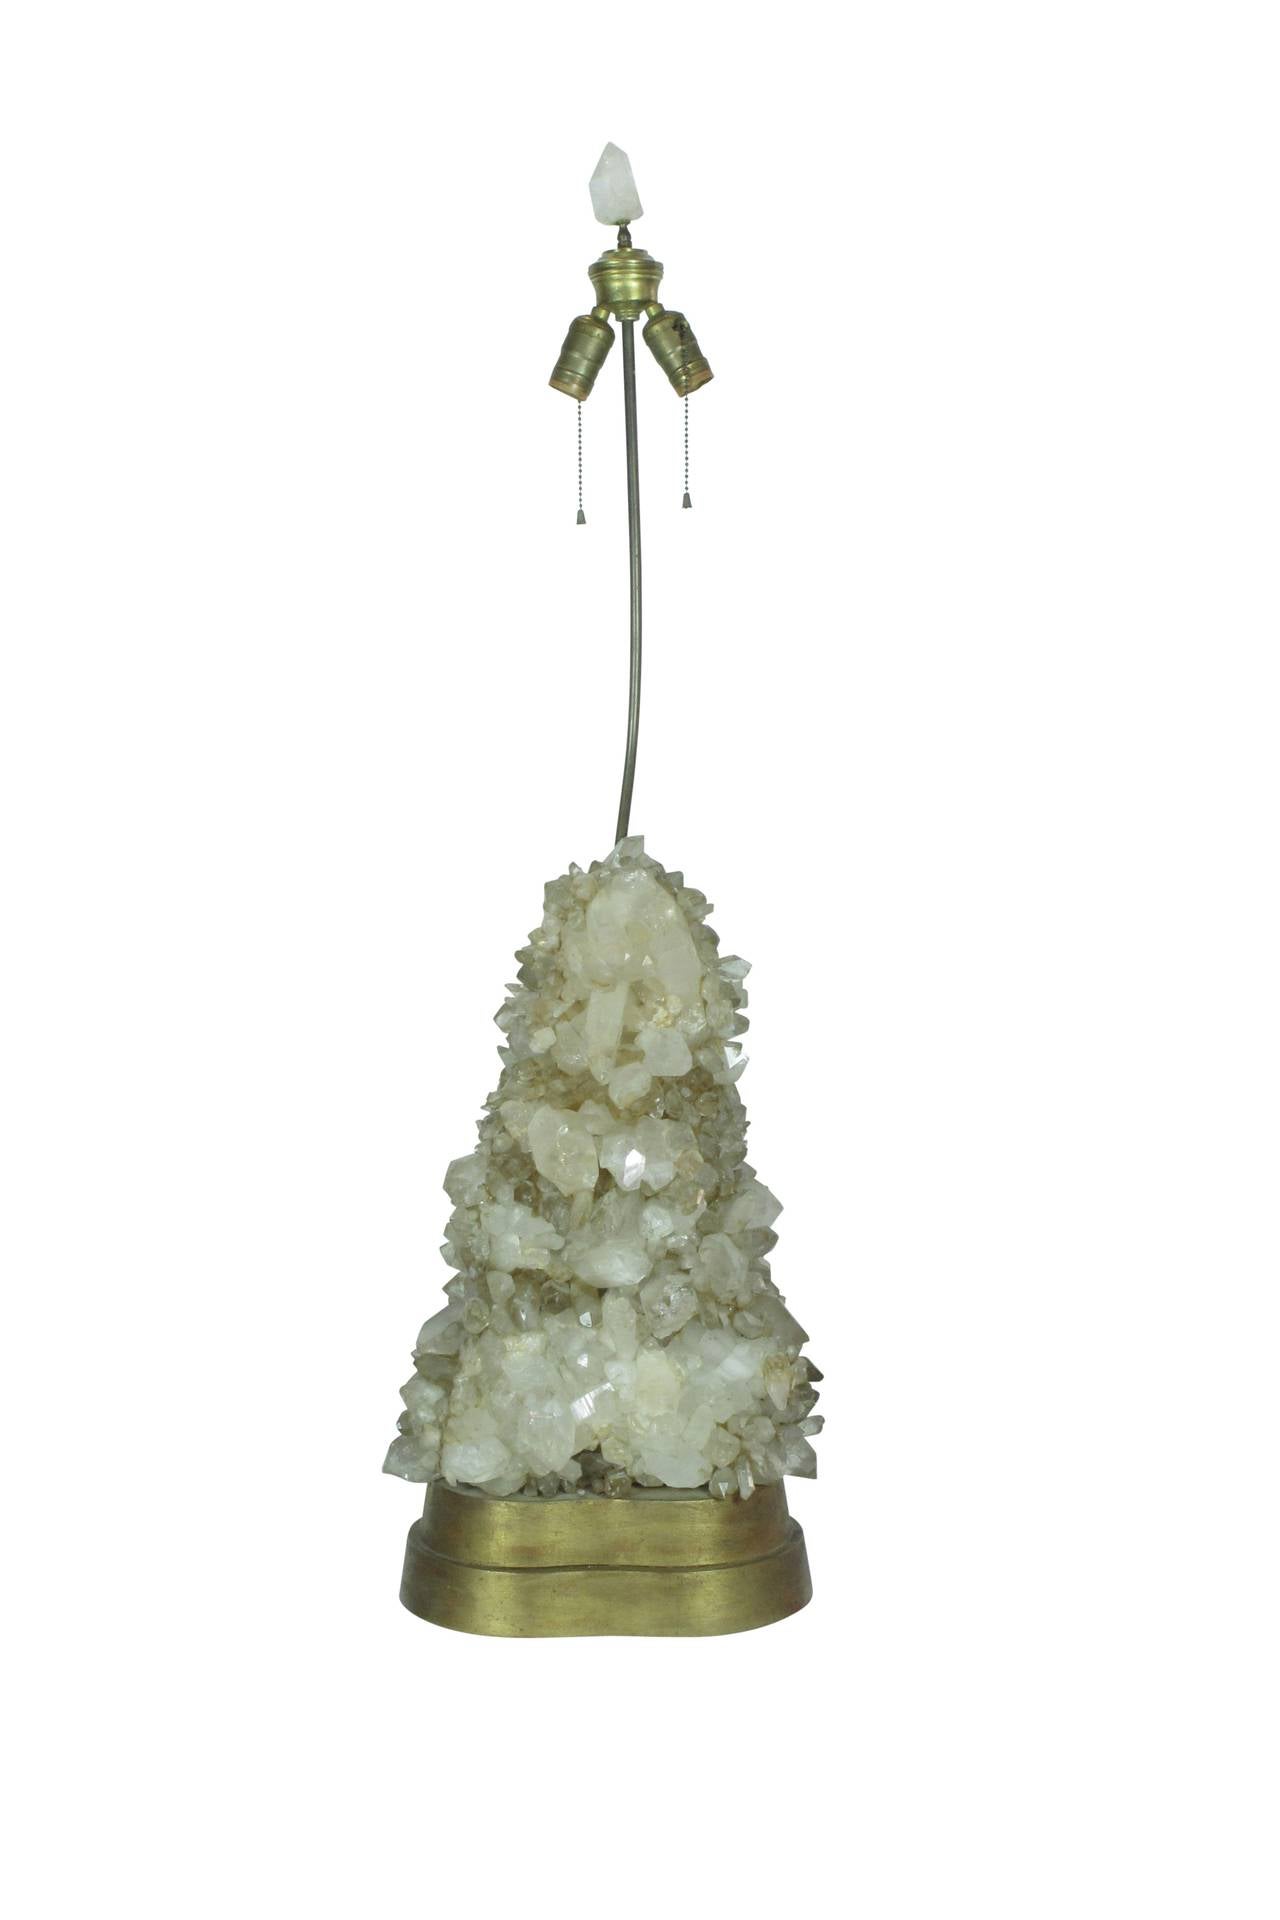 Carole Stupell Rock Crystal Table Lamp USA 1940's. Chic rock crystal table lamp by Carole Stupell with gold leaf base. Retains original finial. An excellent example of this lamp with a the back of the lamp complete with crystals. Height to the top